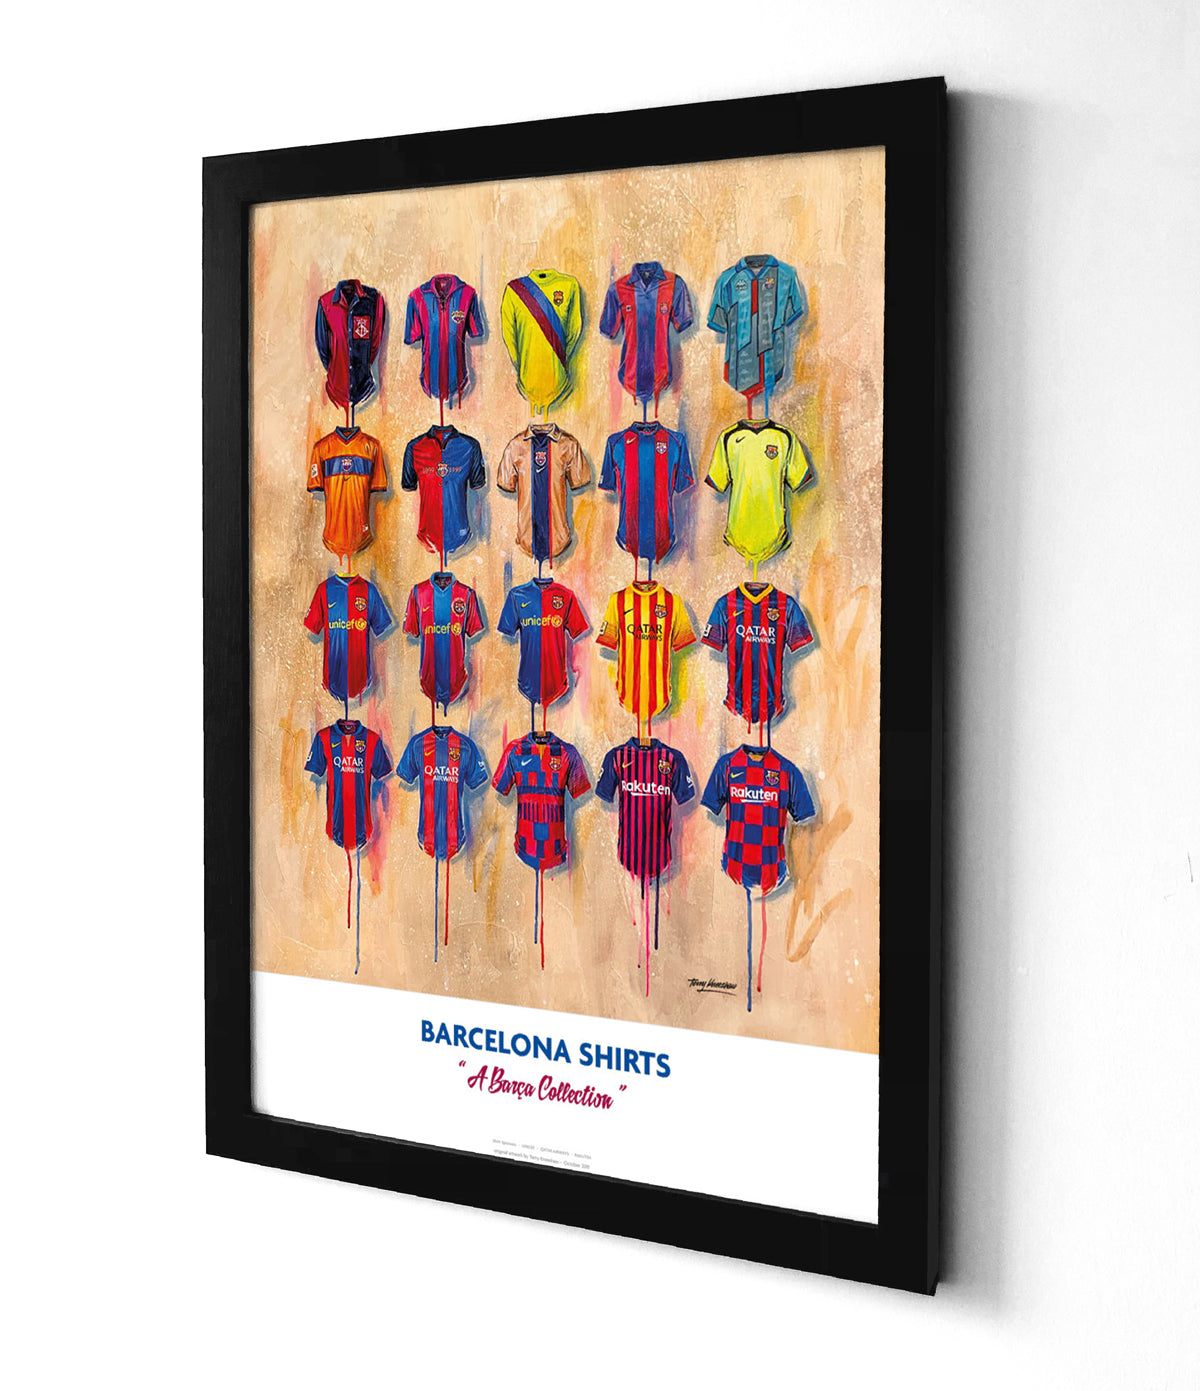 Artwork by Terry Kneeshaw depicting a collection of twenty iconic Barcelona football jerseys worn by the club's legends throughout their history. The jerseys feature the club's crest and kit manufacturer and sponsor logos on the front. The artwork is a high-quality print of a hand-painted original, which uses textured brushstrokes to create a dynamic effect. The print is available in A2 size as a limited edition.